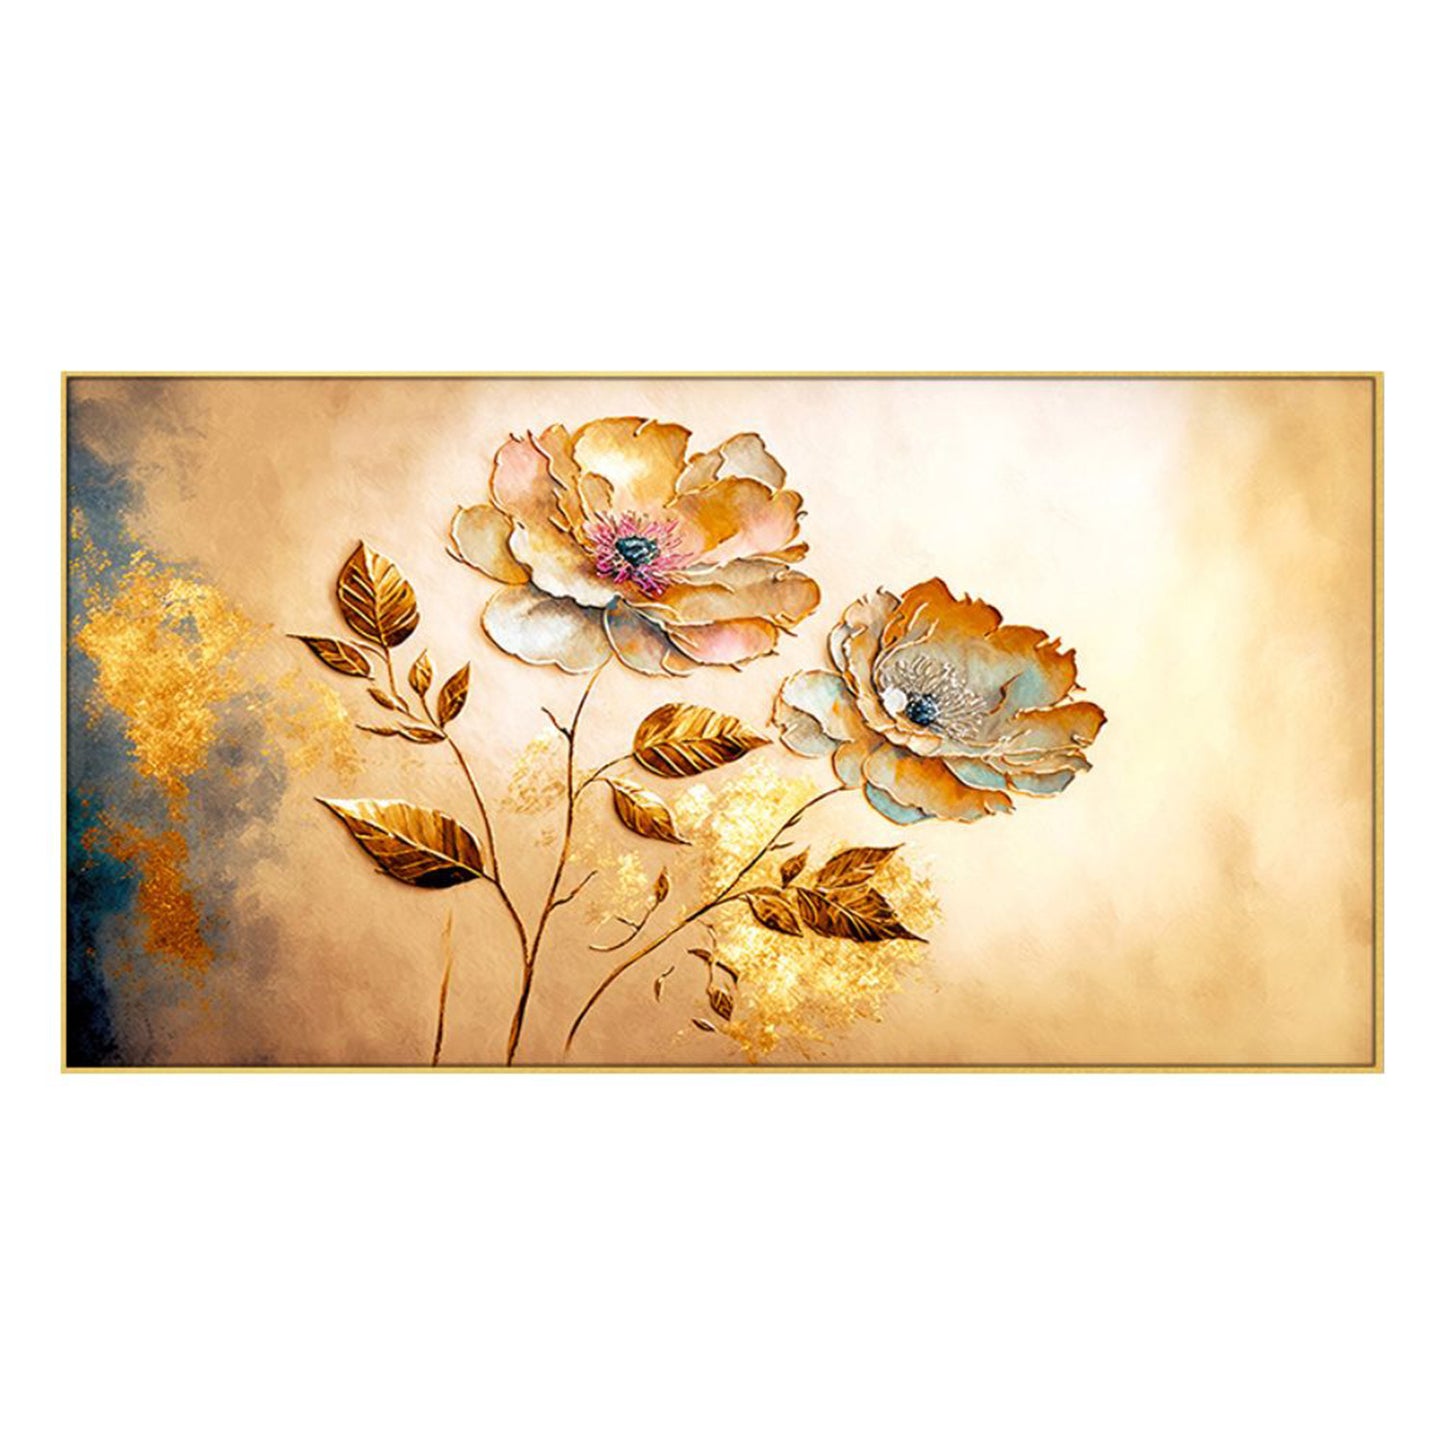 Vibrant Flowers on Golden Canvas Wall Painitng